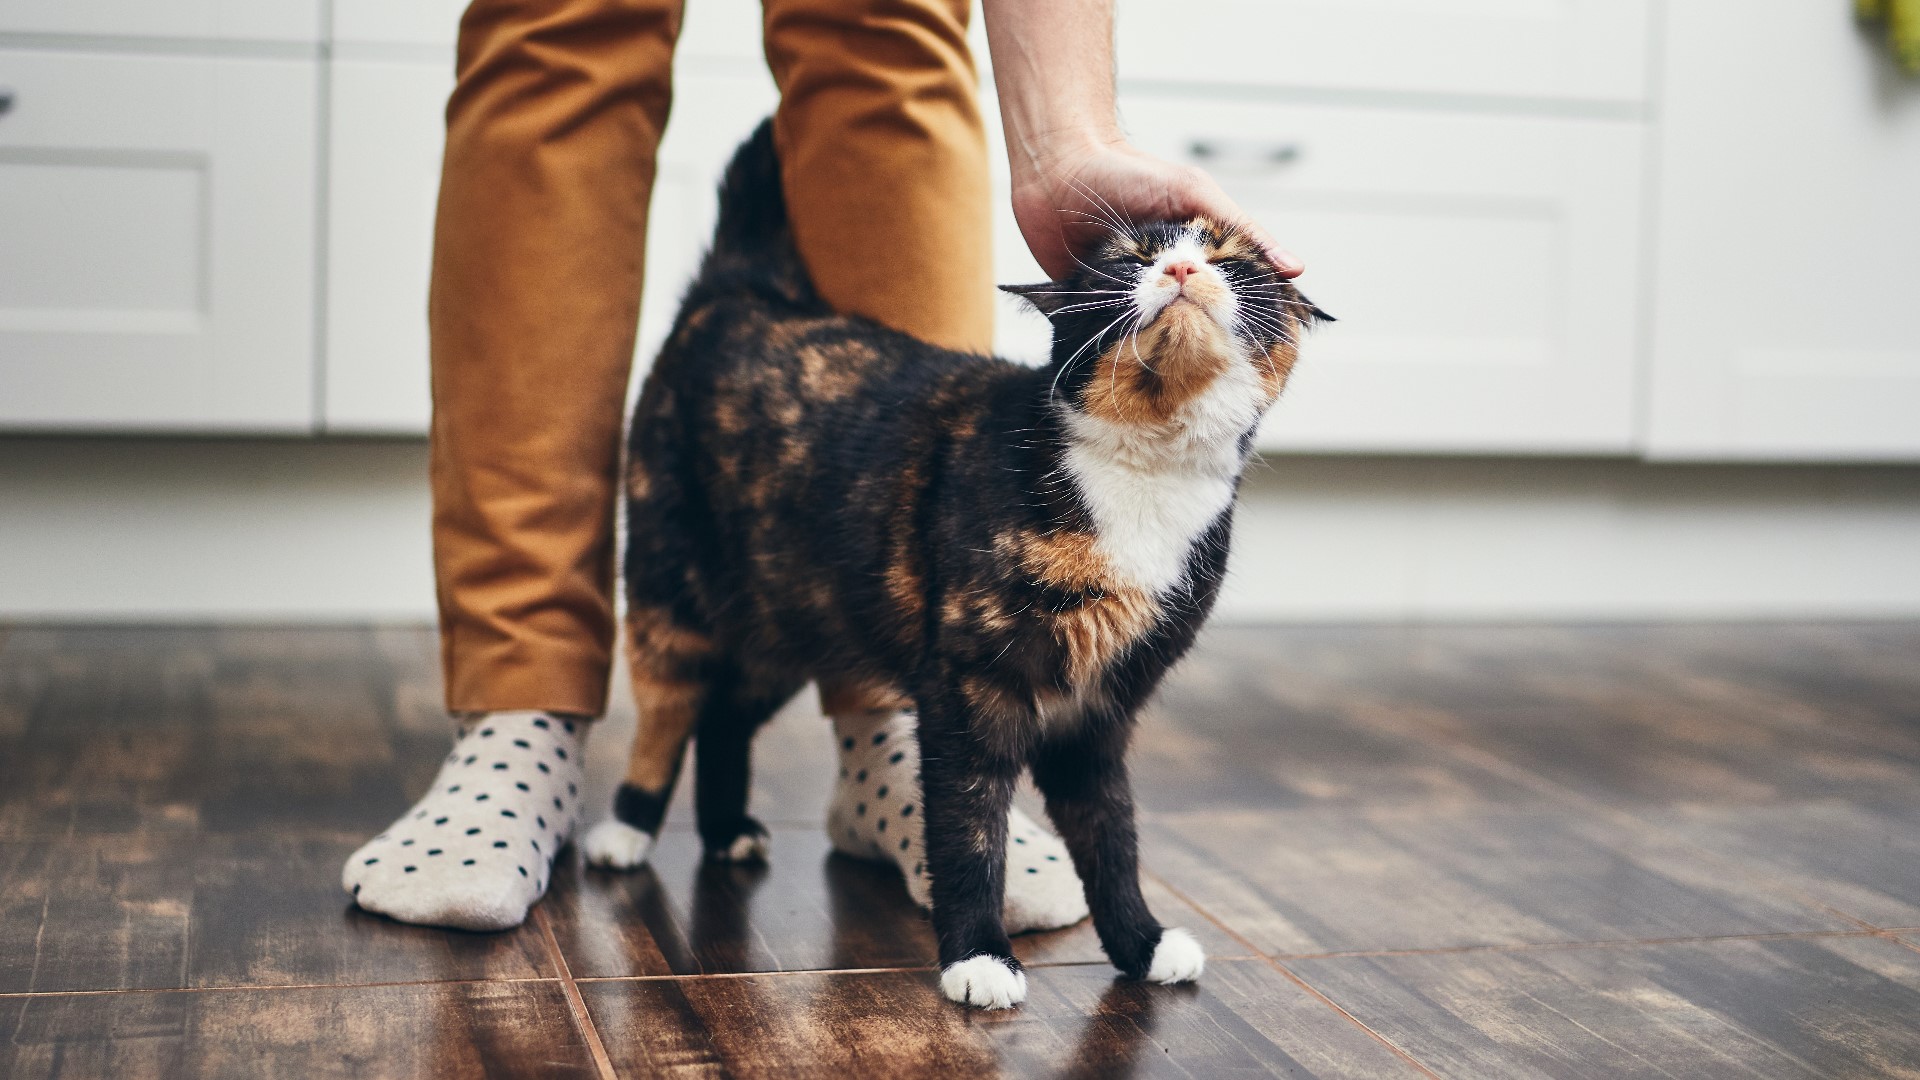 Two cats recently tested positive for the coronavirus and it has people questioning what they should do to protect their pets from the virus.